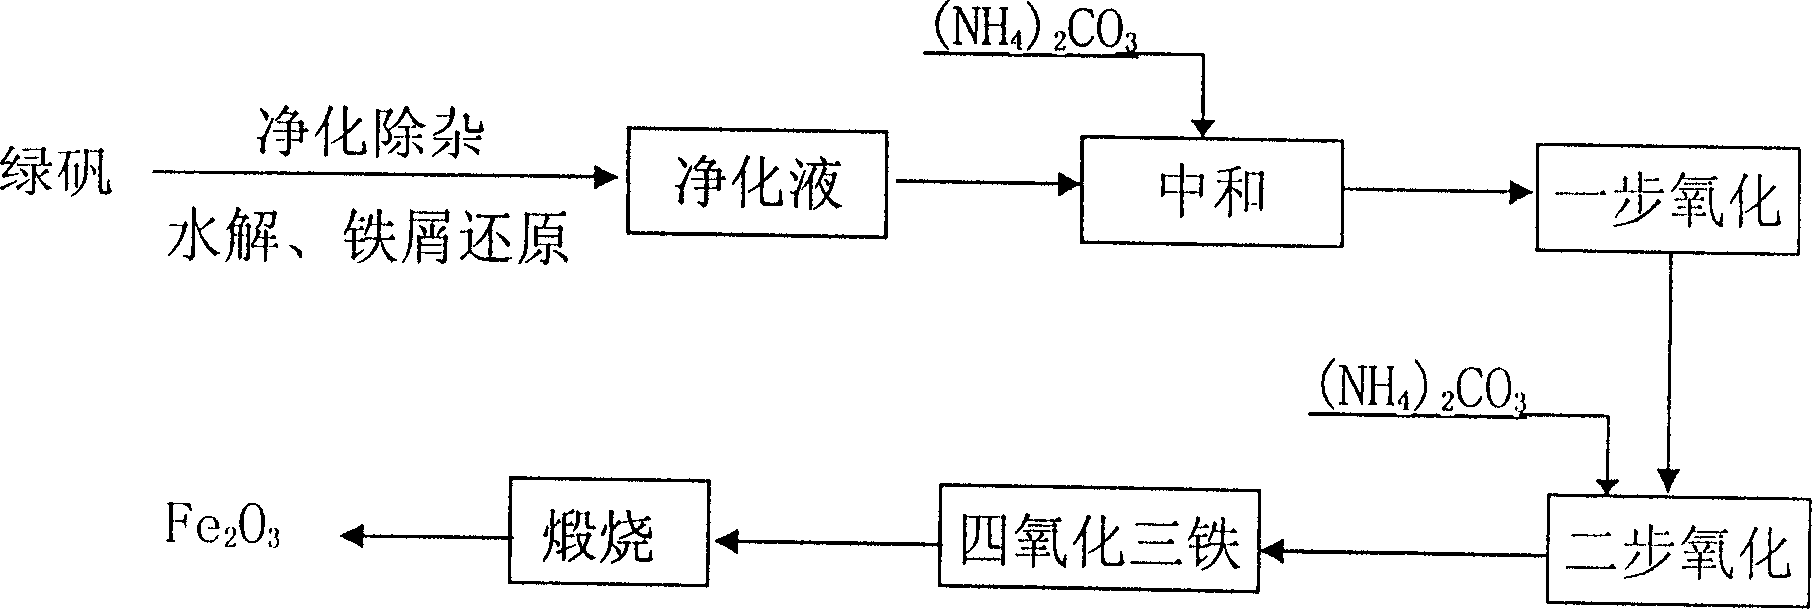 Method of preparing high purity iron oxide for soft magnet using titanium white by product ferrous sulphate